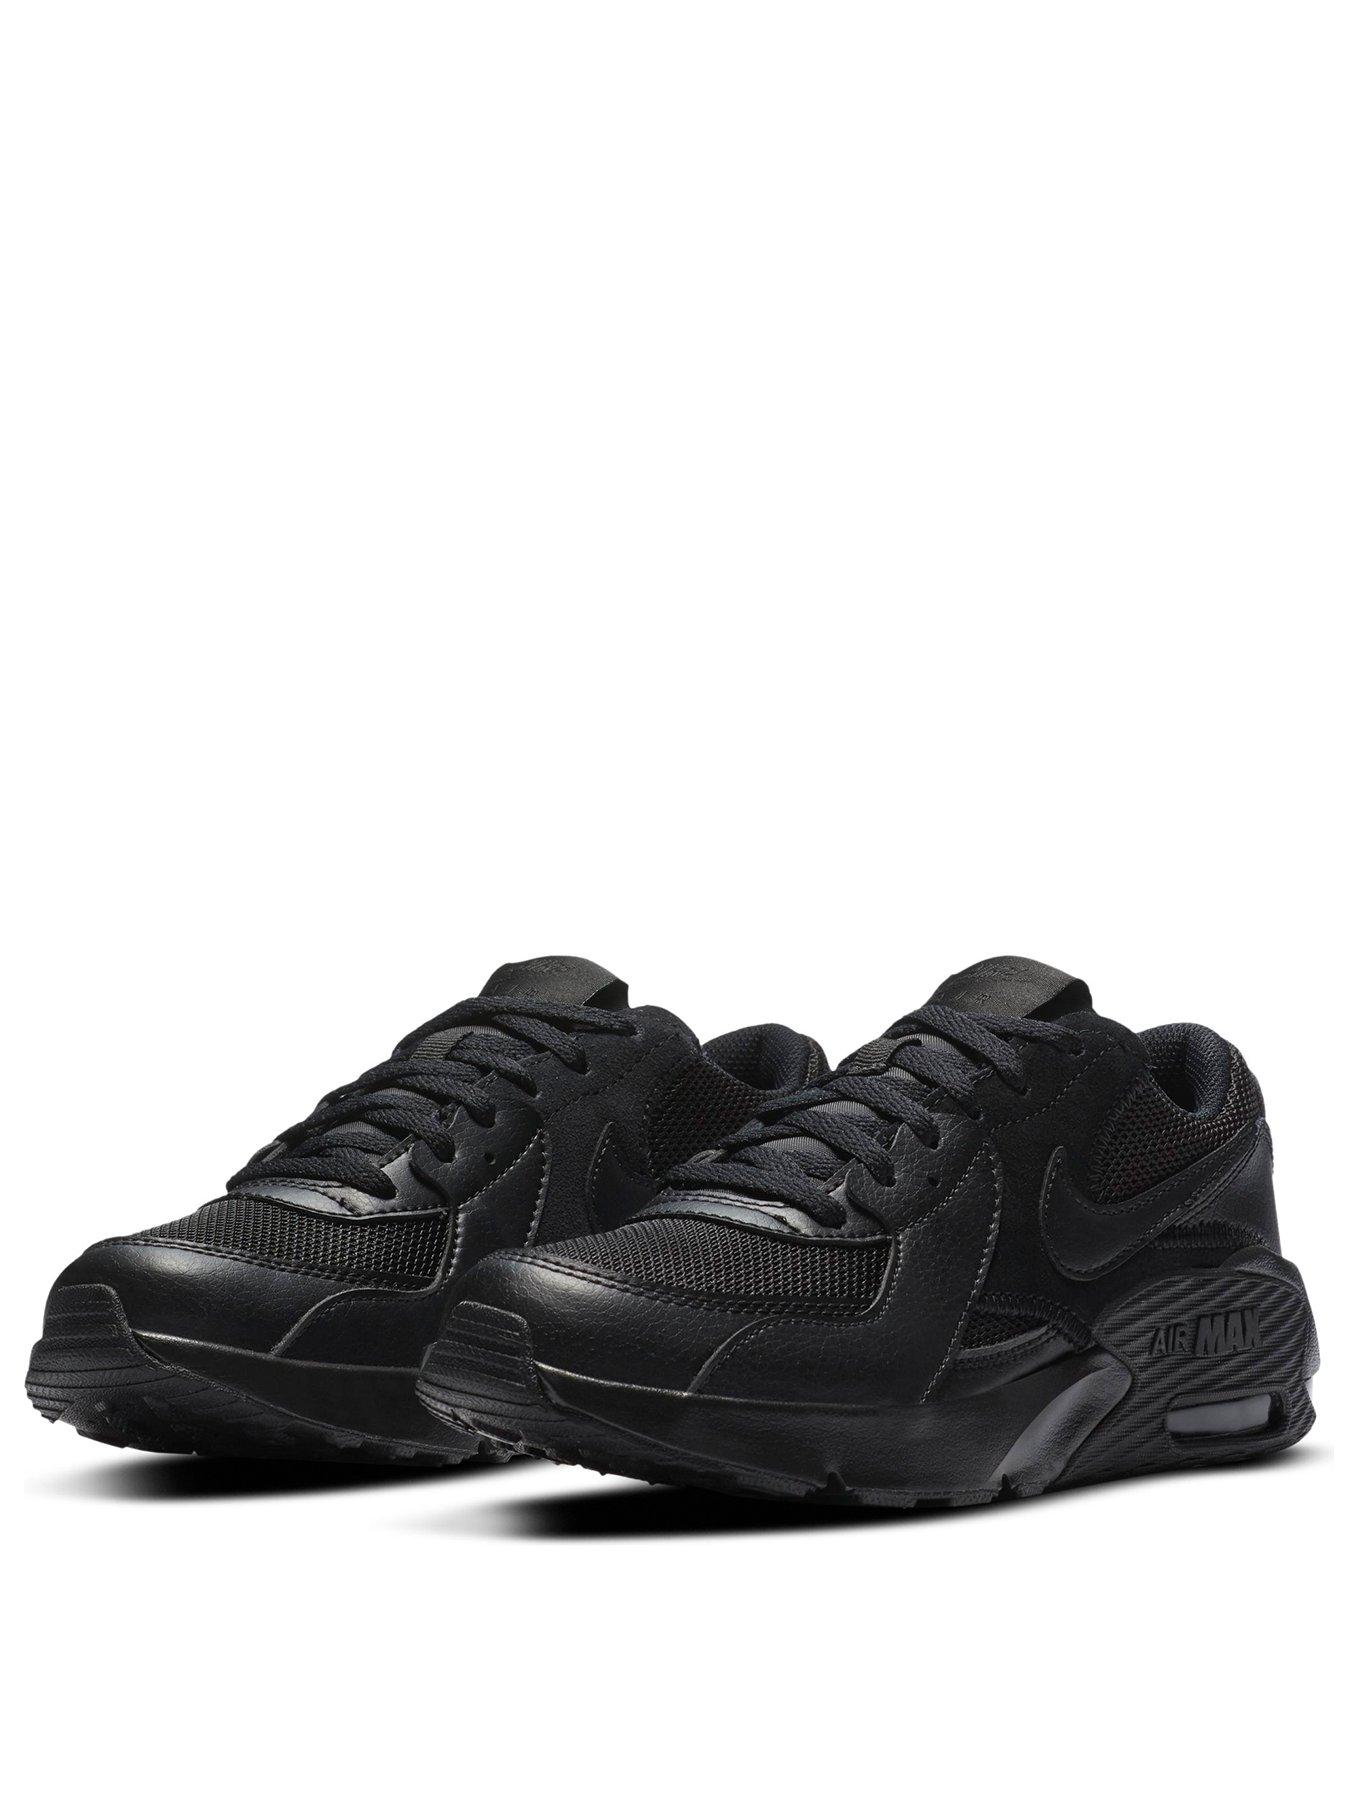 Nike Air Max Excee Junior Trainers - Black | littlewoods.com